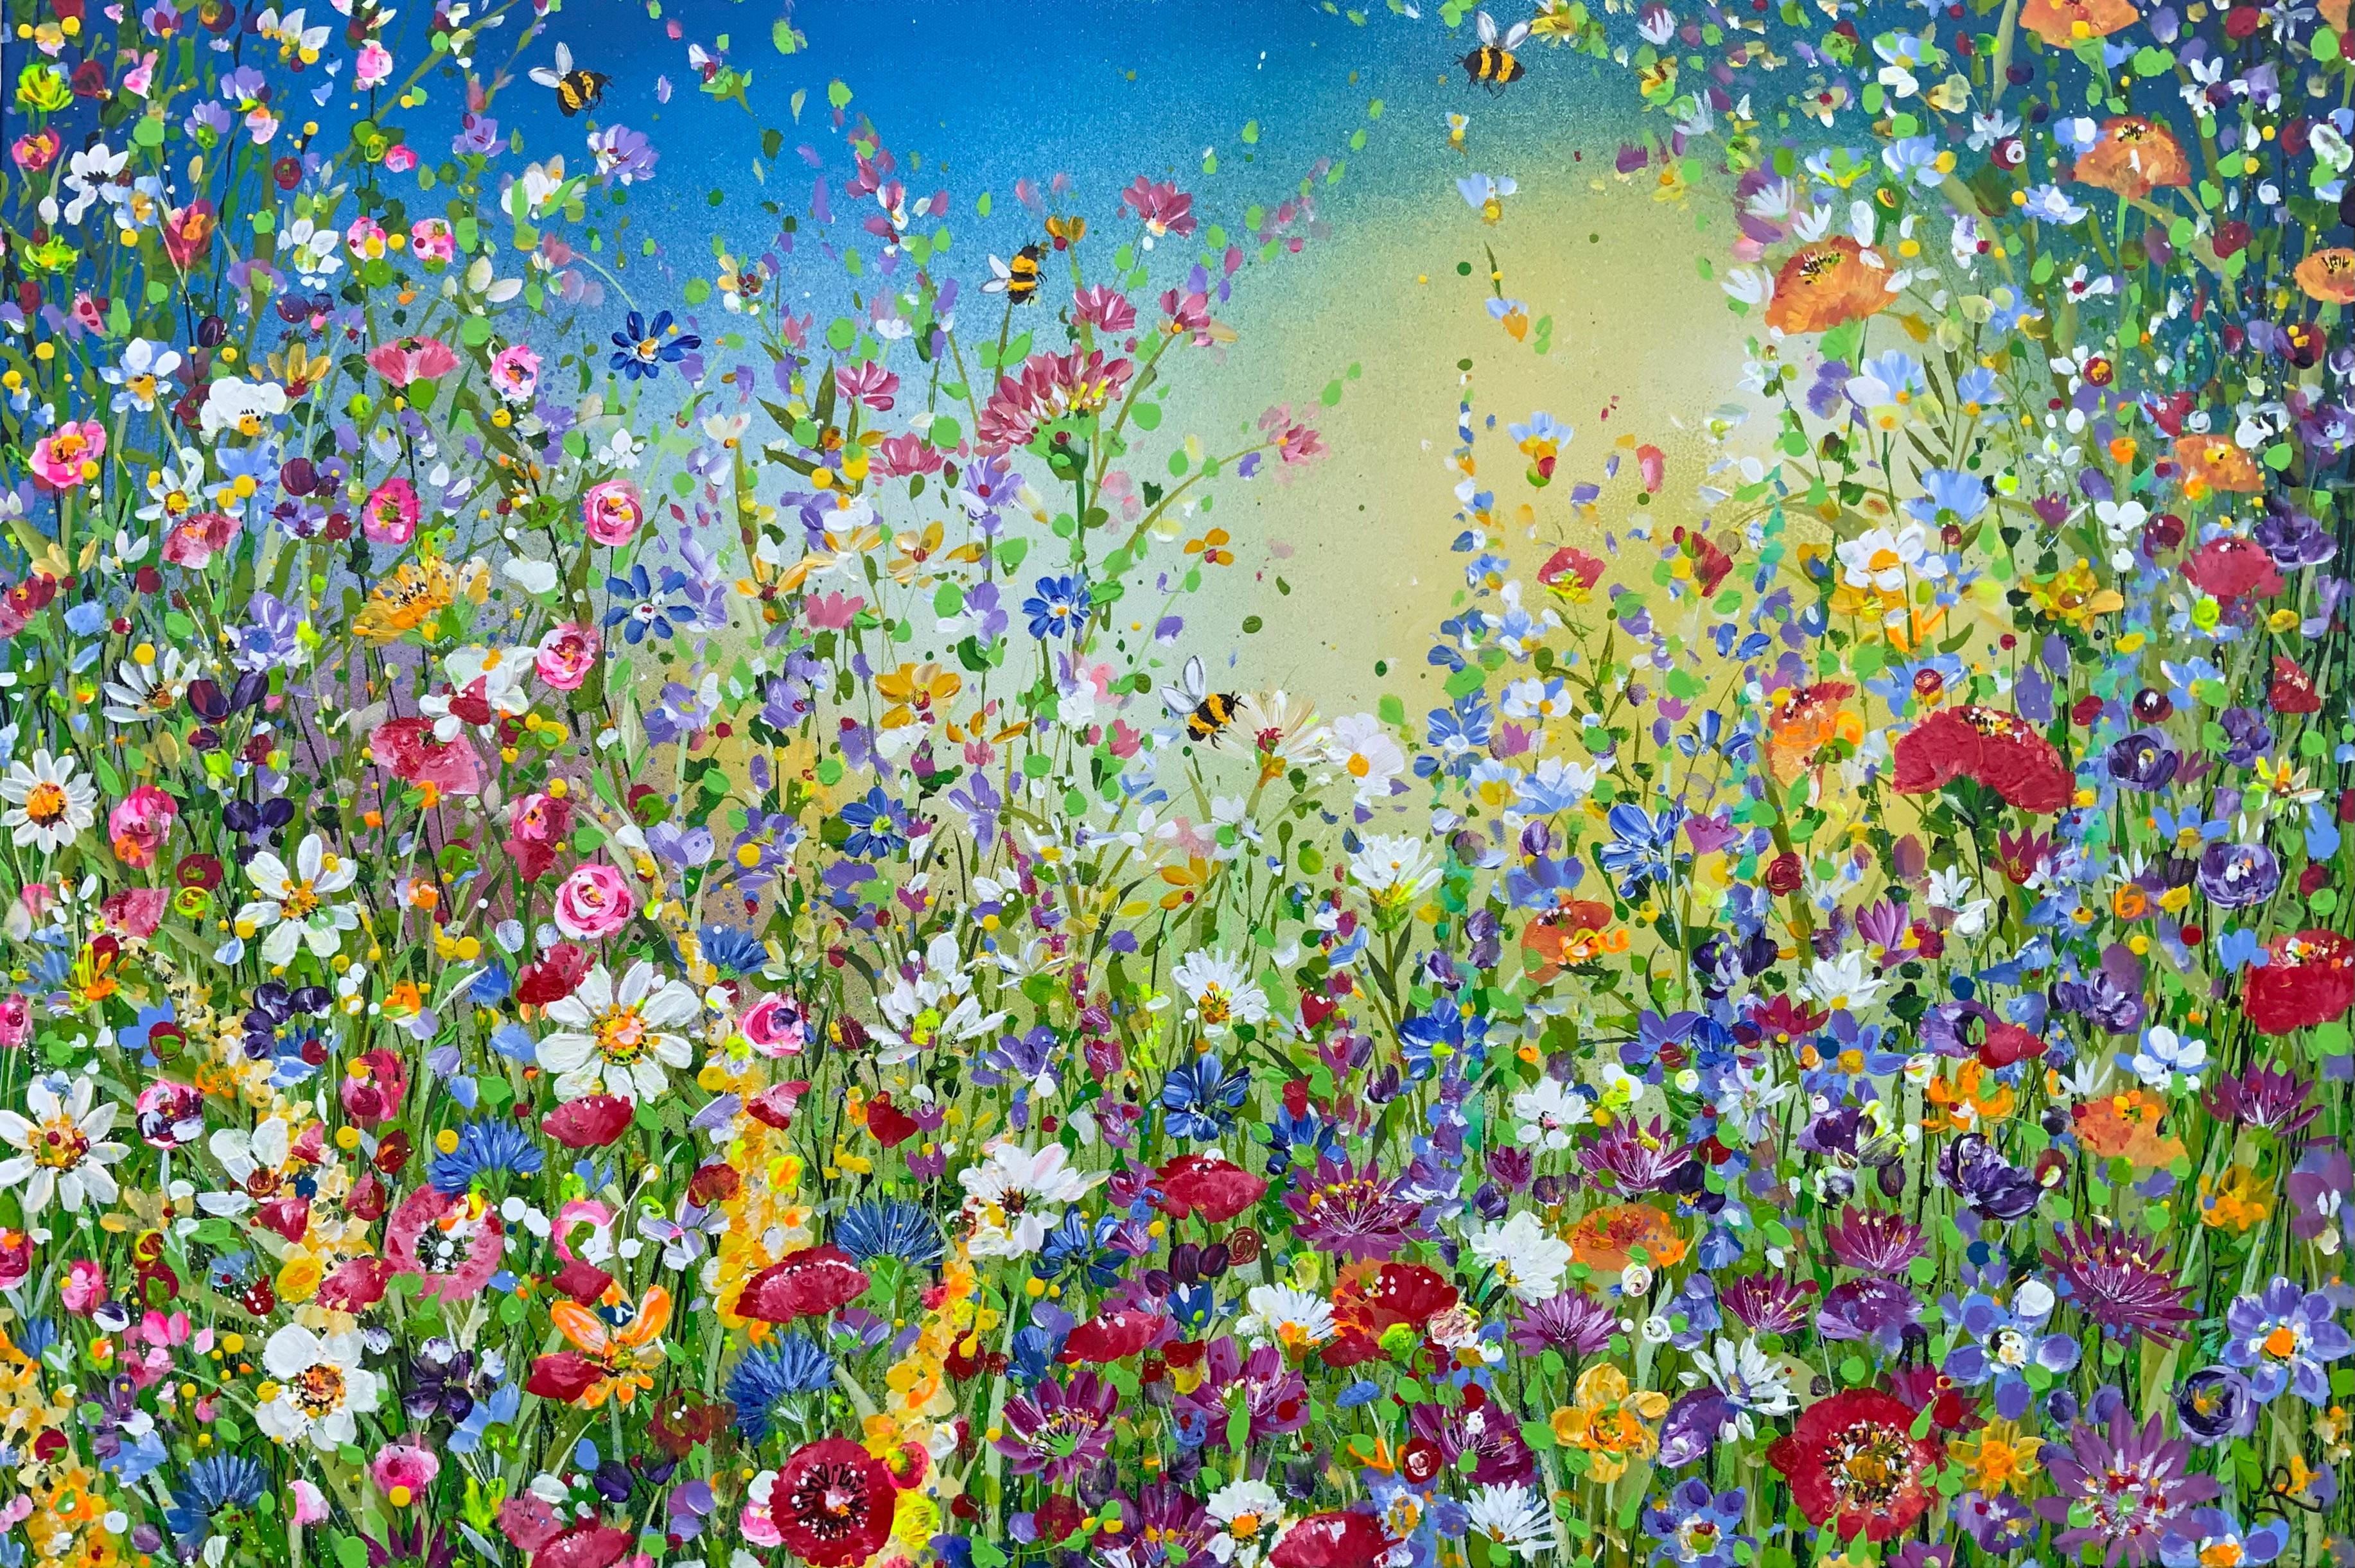 Joy of Summer Floral Mead, Original painting, Floral, Meadow, Landscape painting